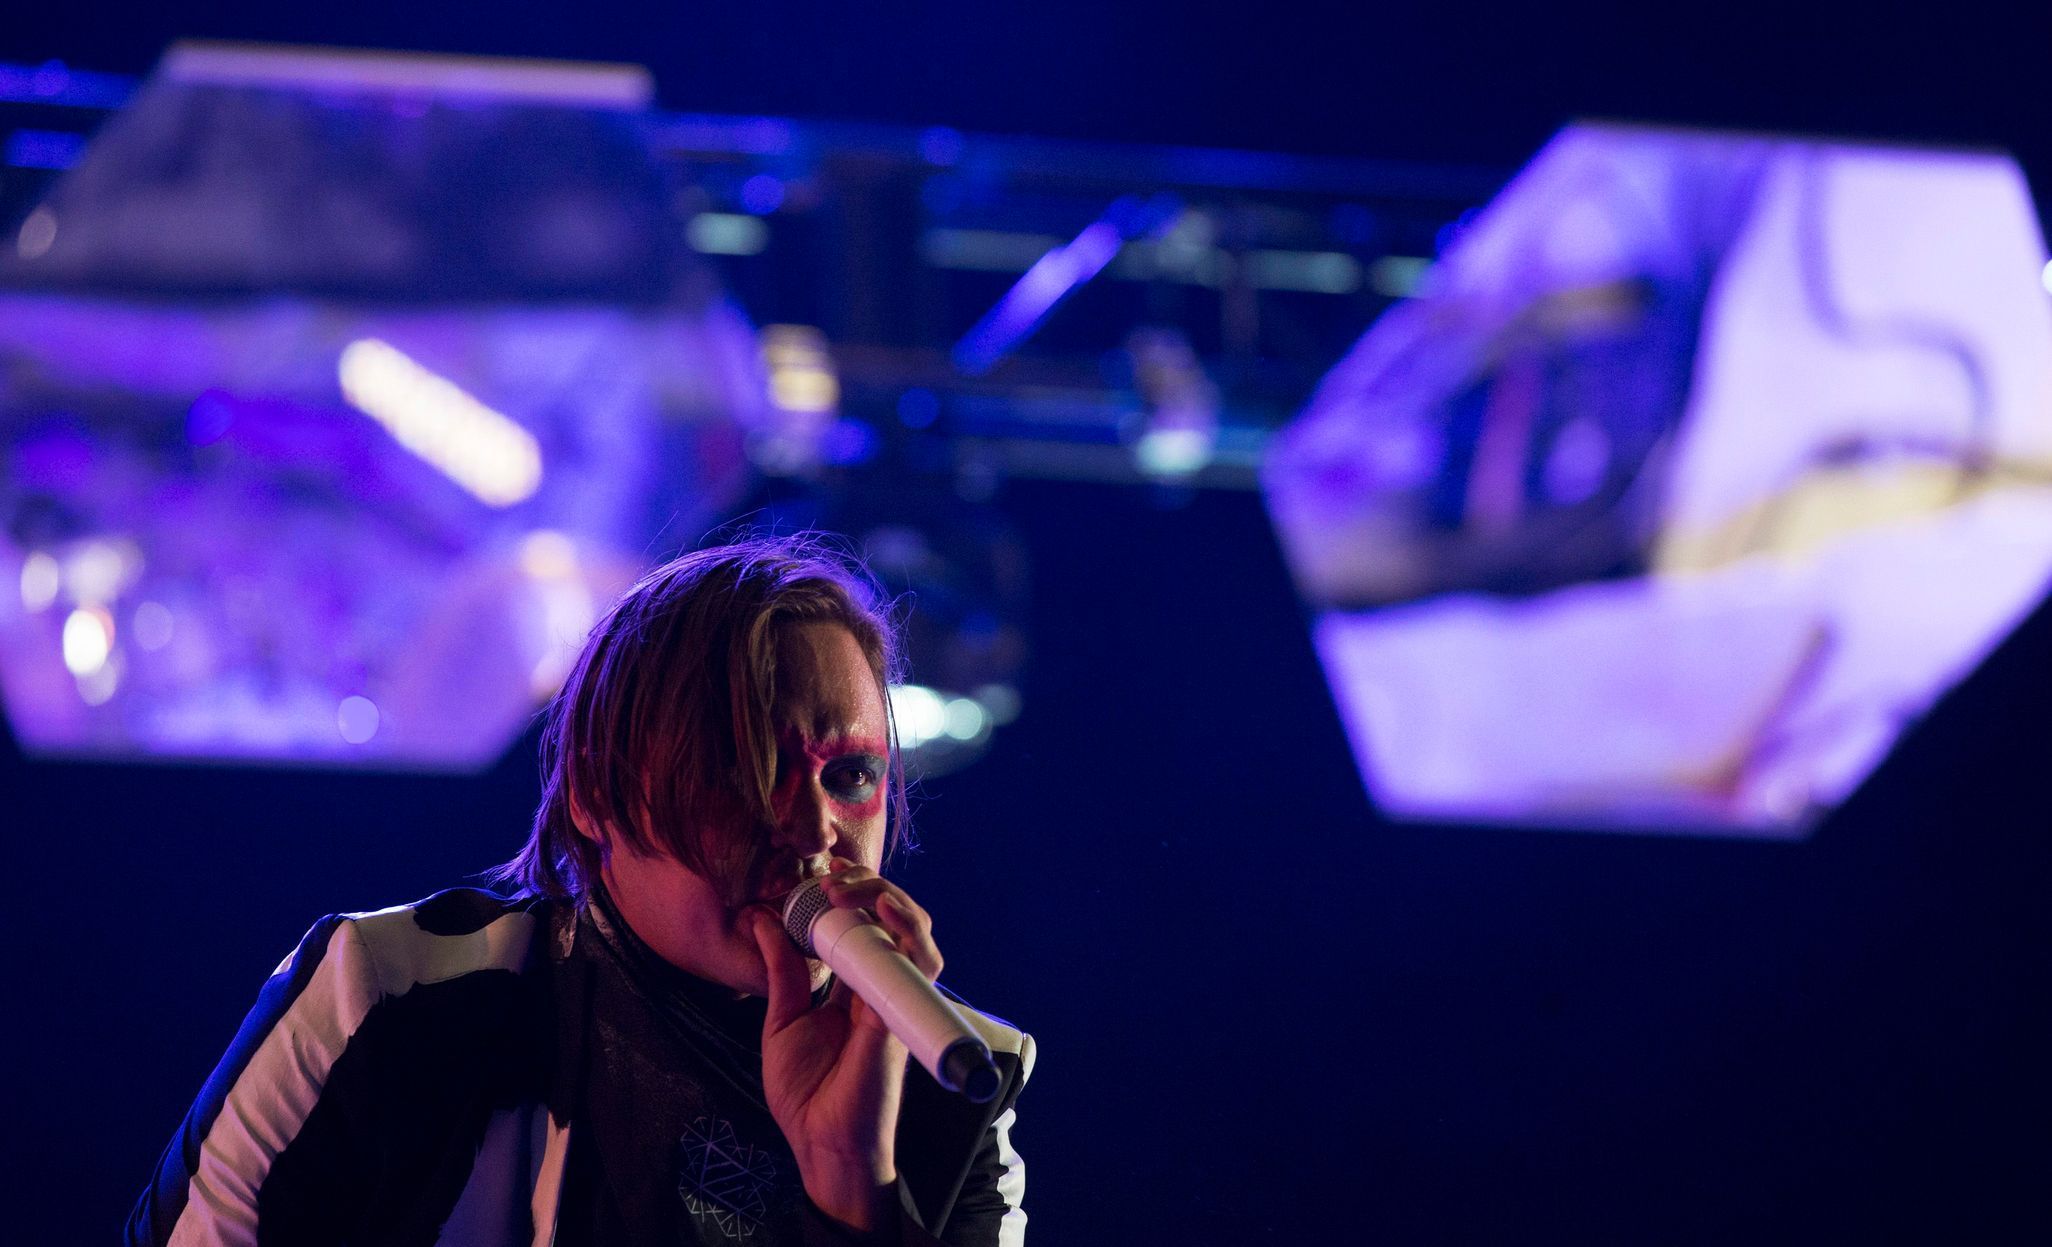 Lead vocalist Win Butler of rock band Arcade Fire performs at the Coachella Valley Music and Arts Festival in Indio